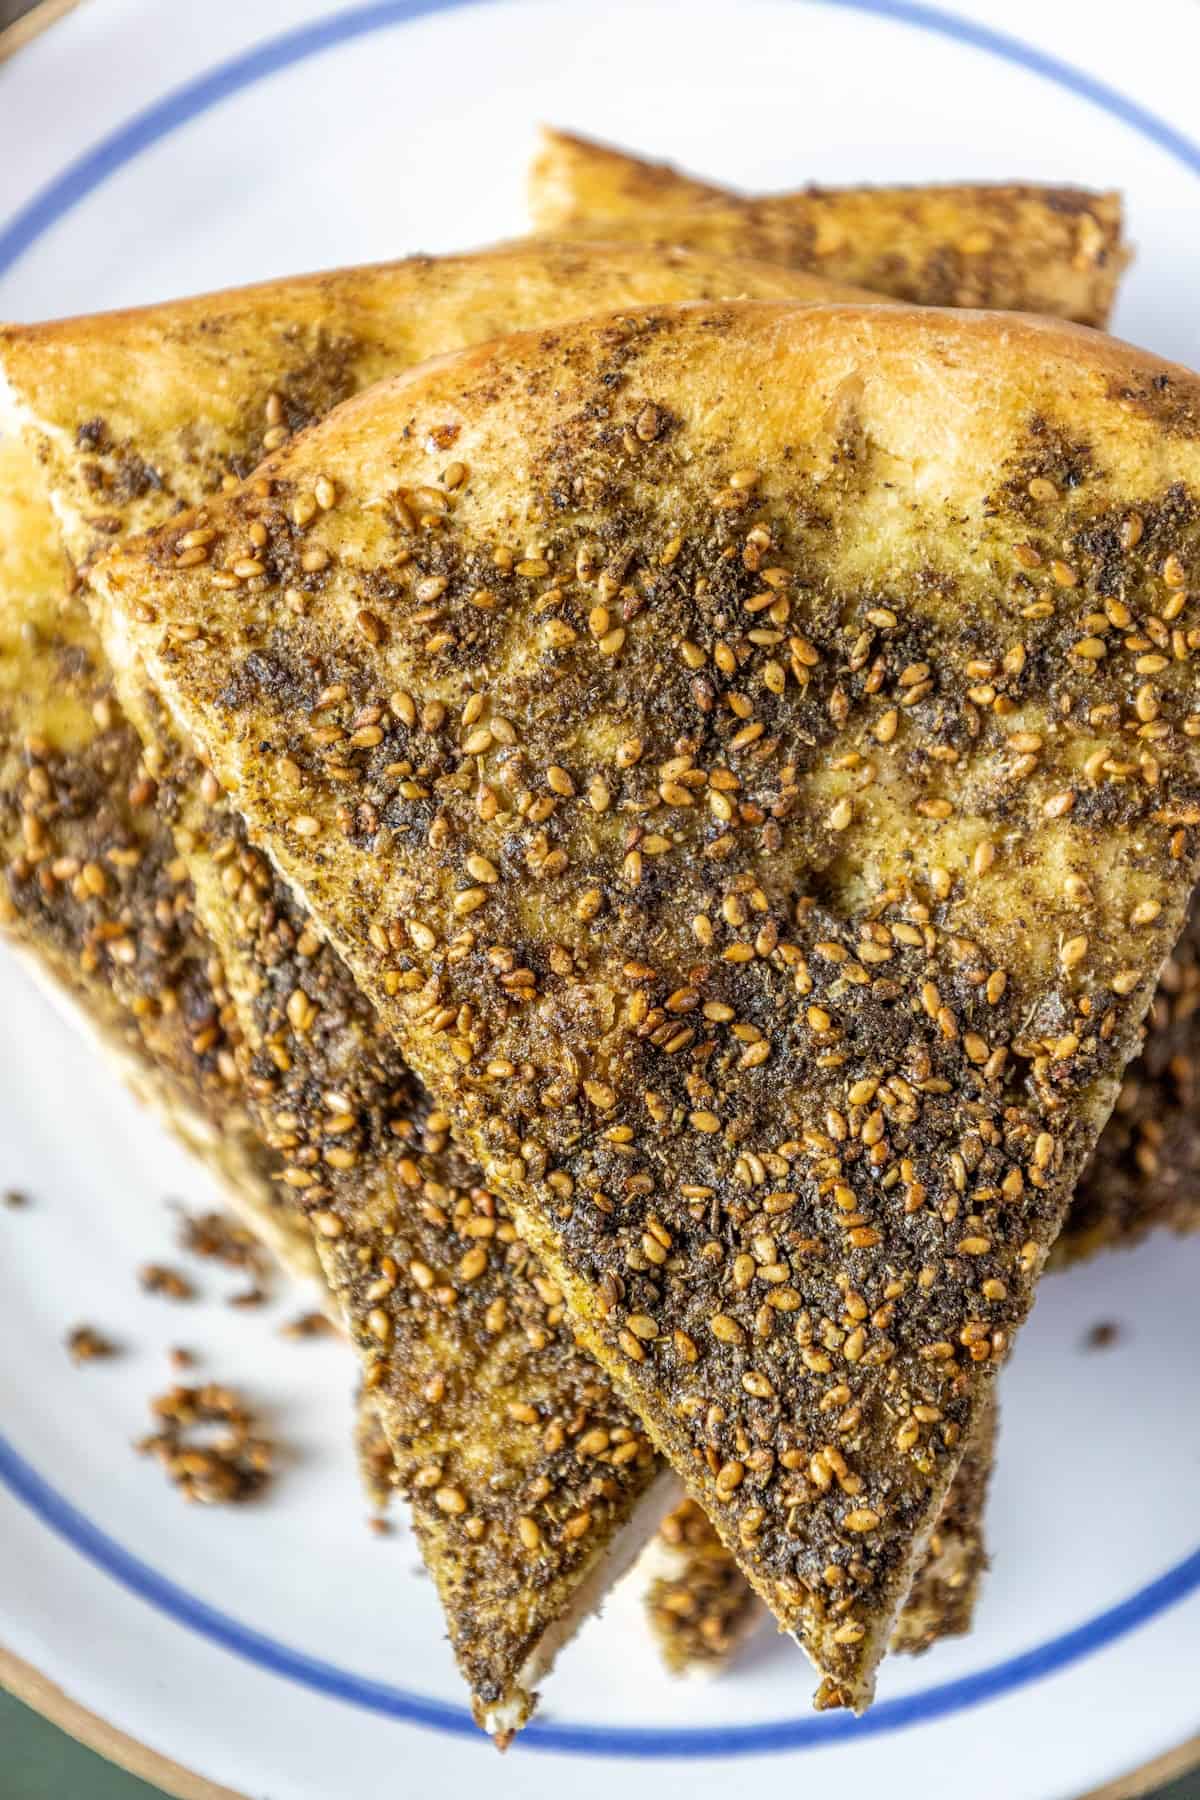 A plate of bread with sesame seeds on it, known as a za'atar manakish or za'atar pizza.